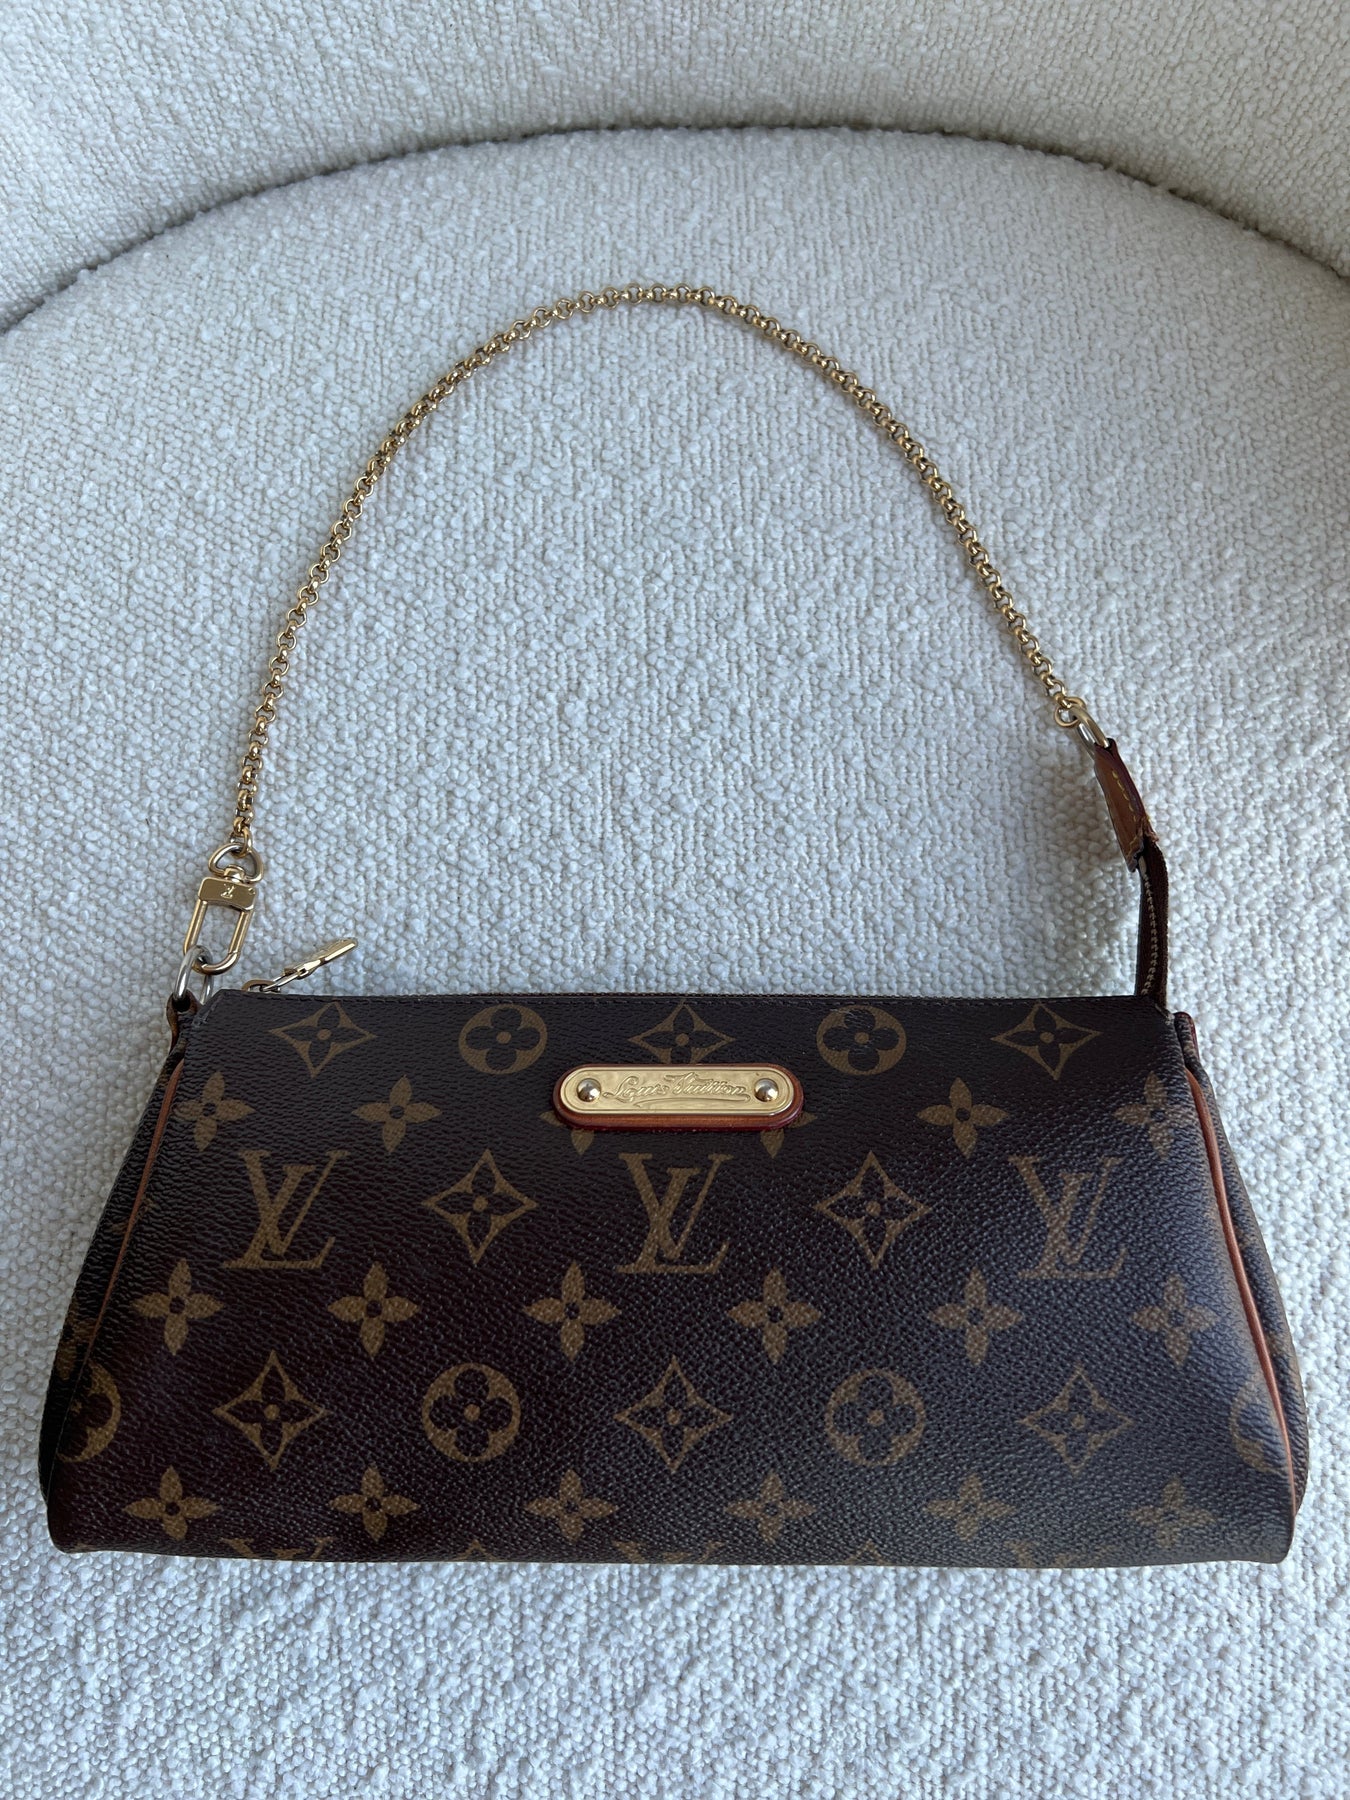 ❤️SOLD) Louis Vuitton Monogram Eva is up for grabs, comes with